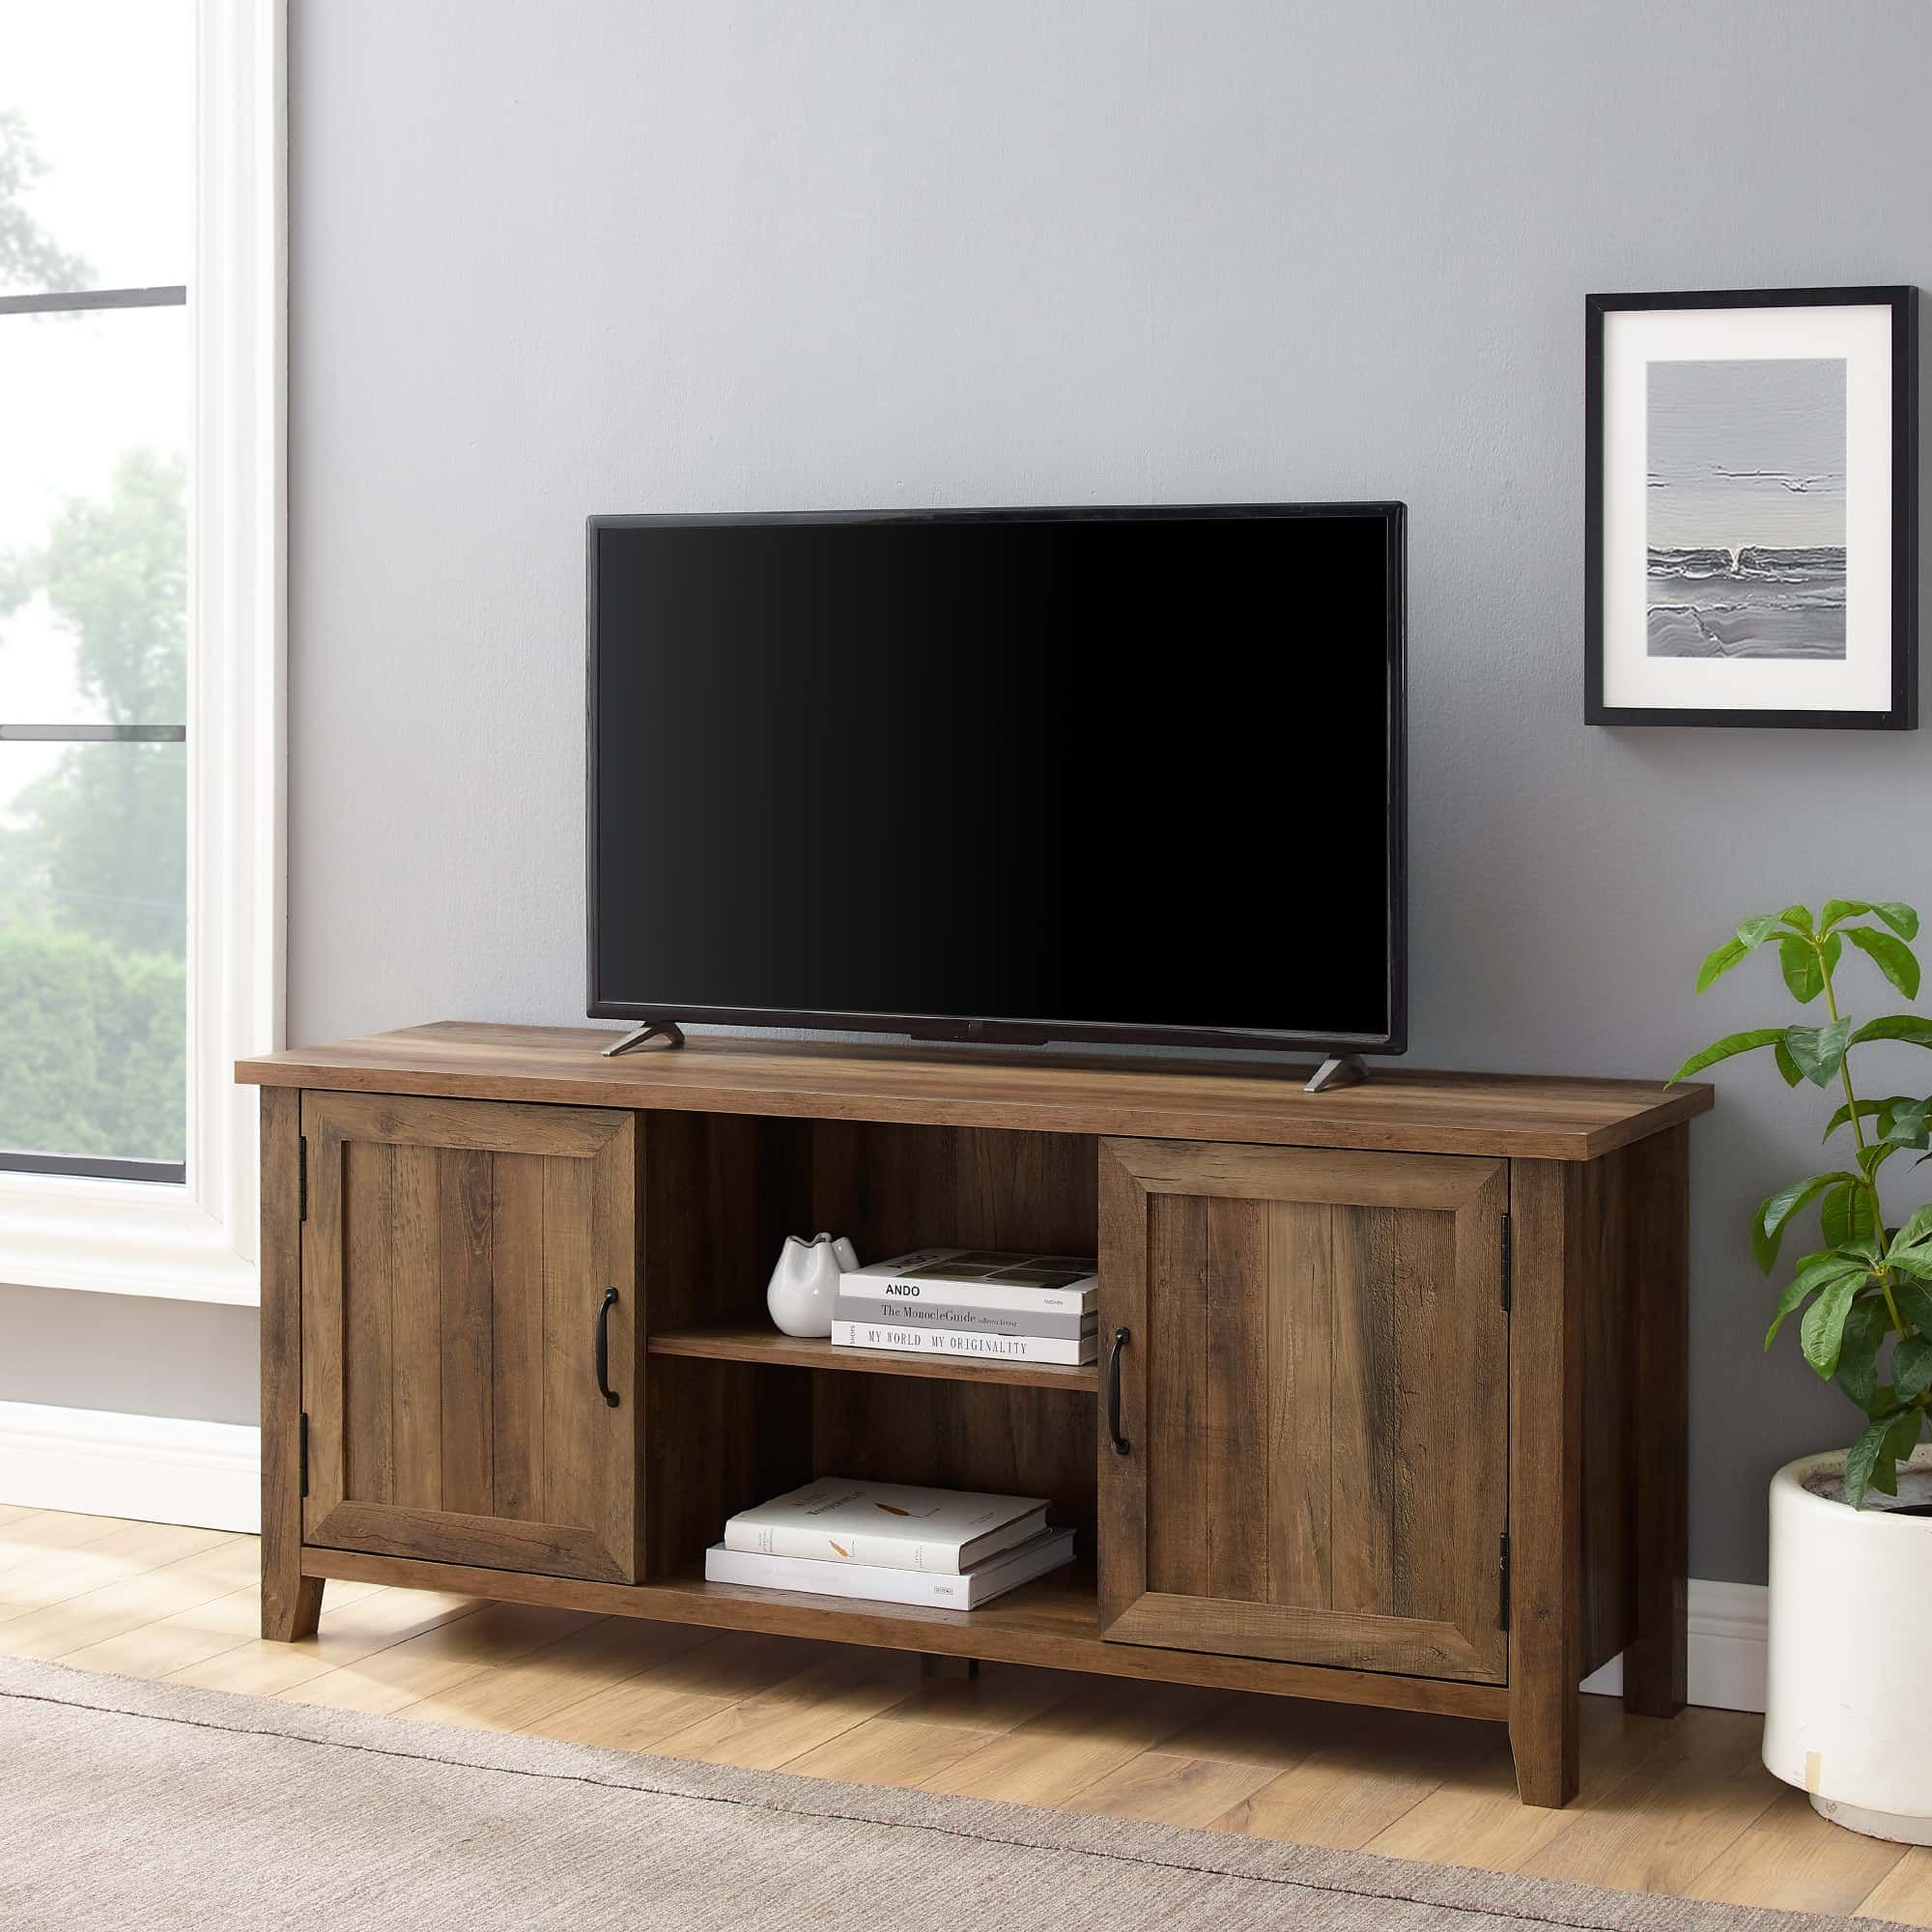 58 Inch Modern Farmhouse Tv Stand – Rustic Oakwalker Edison Inside Modern Farmhouse Rustic Tv Stands (View 9 of 15)